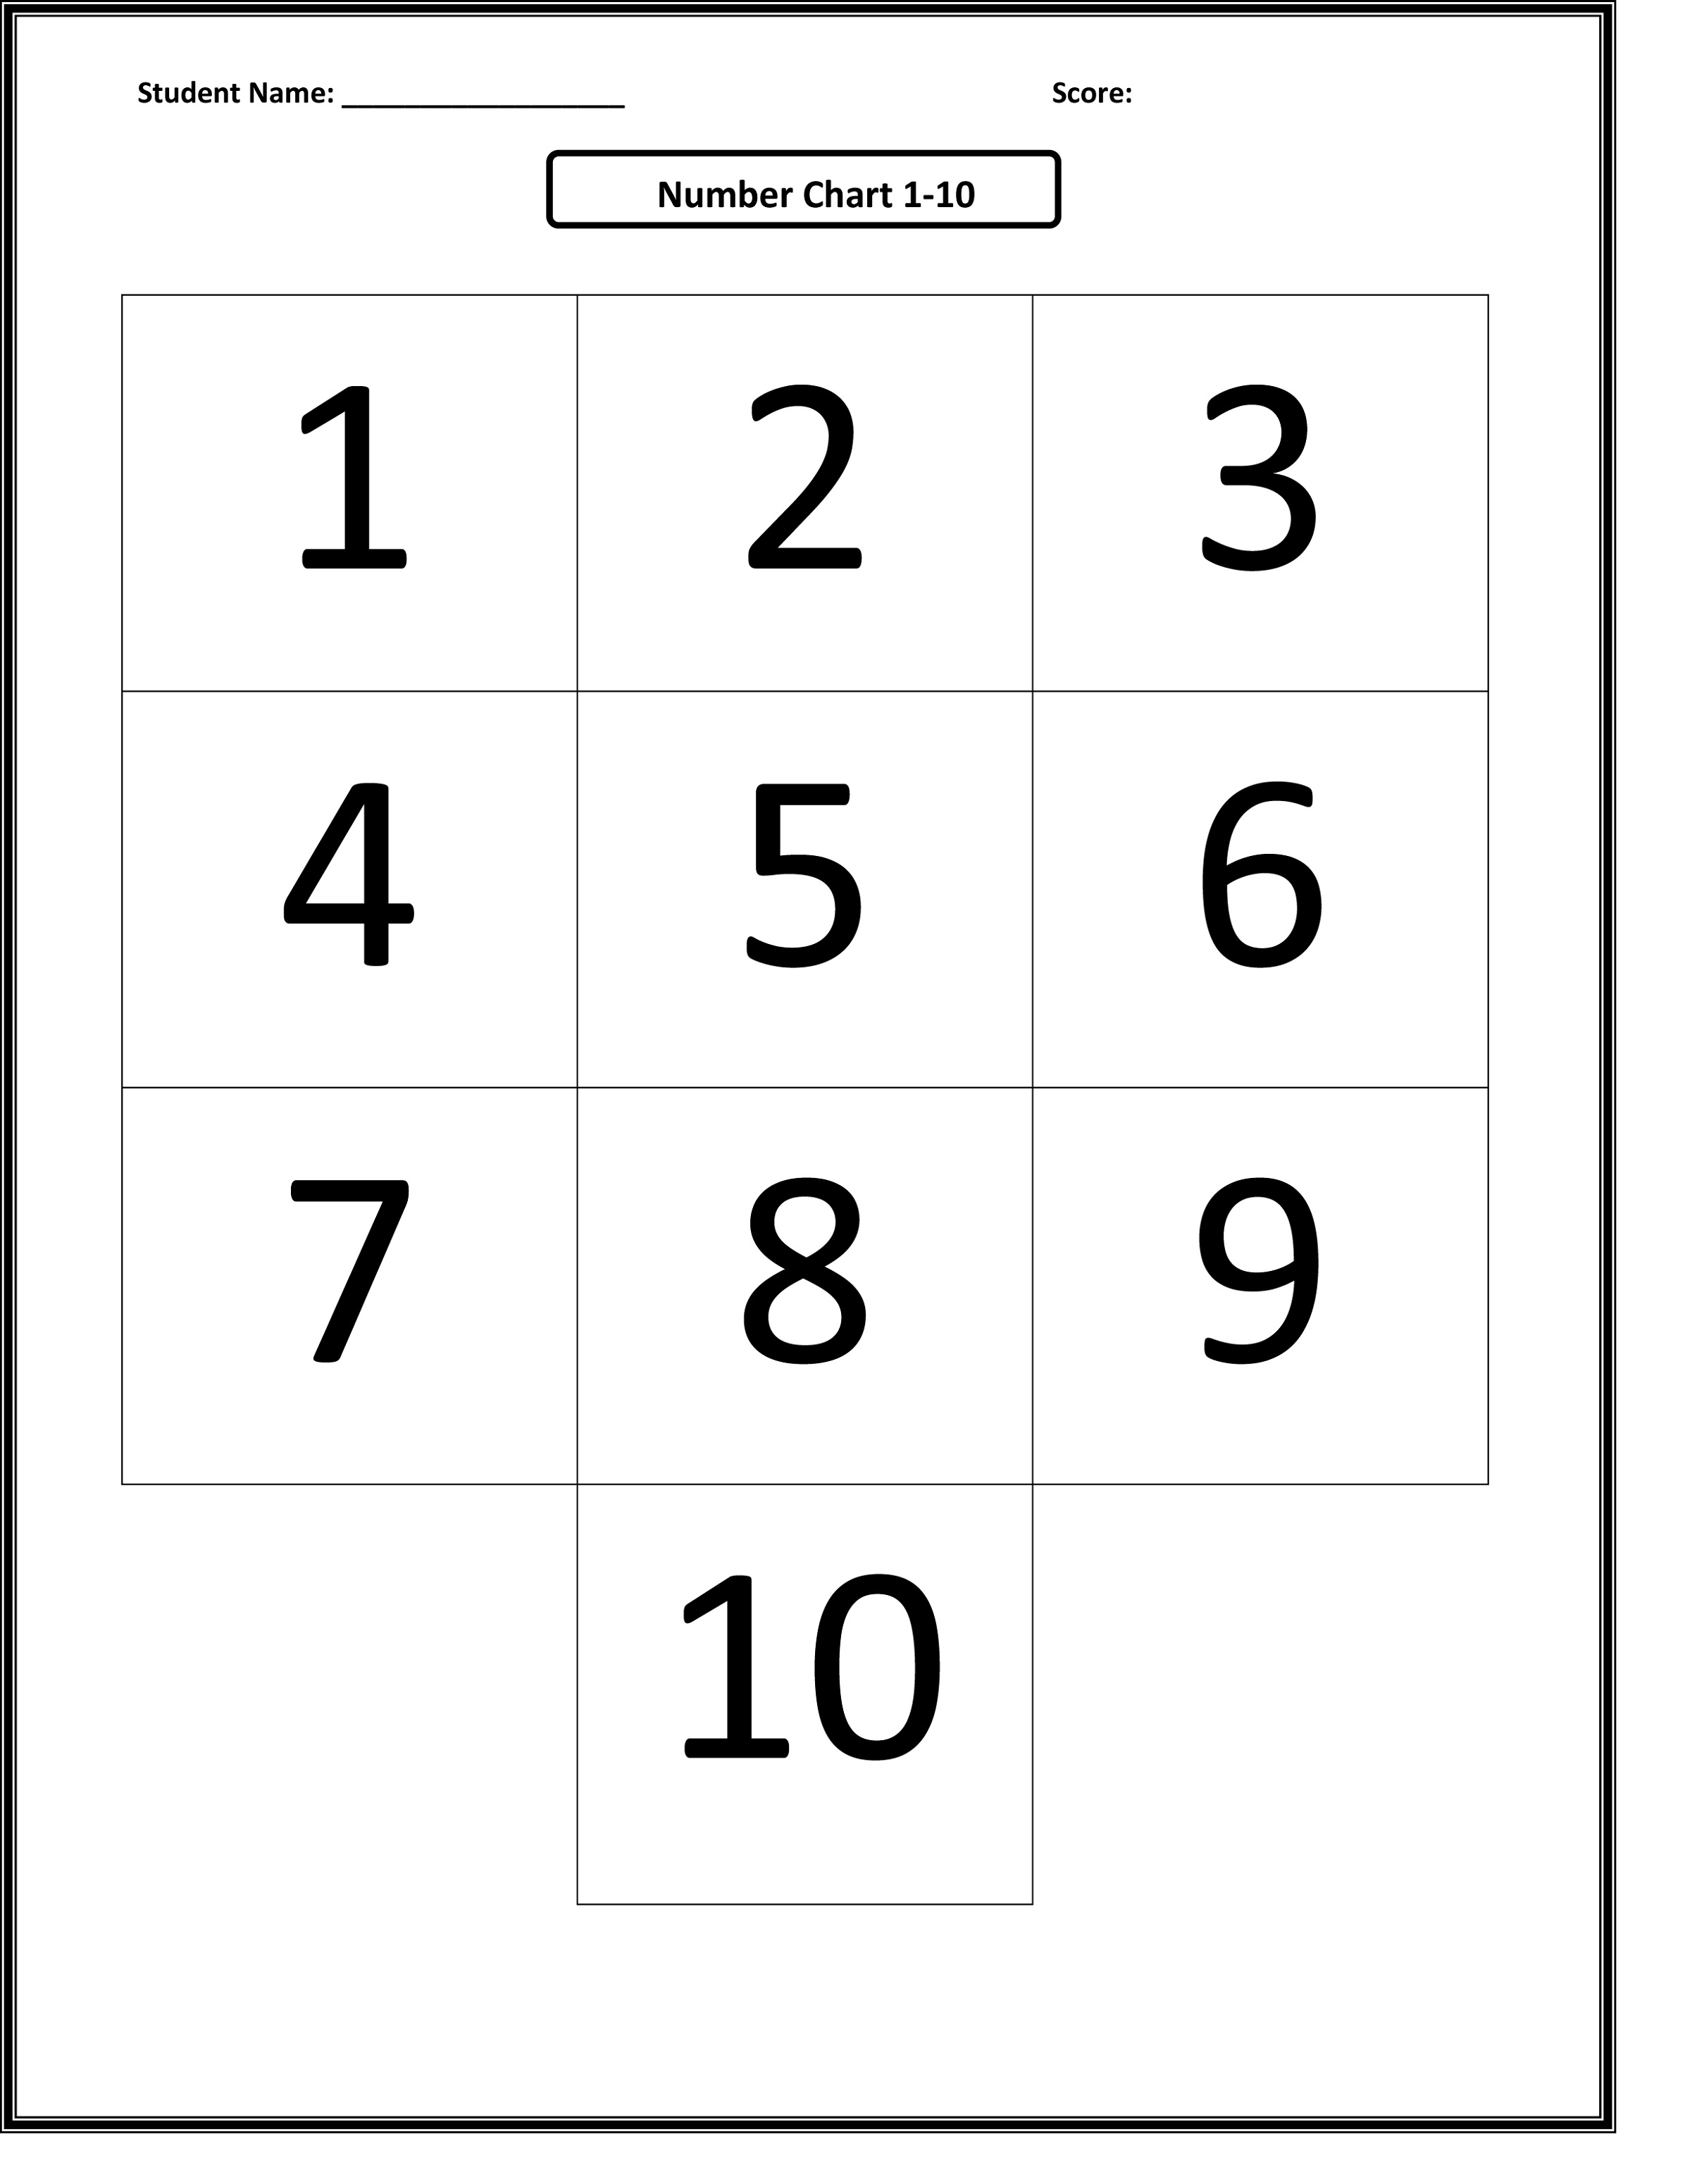 number chart 1-10 simple